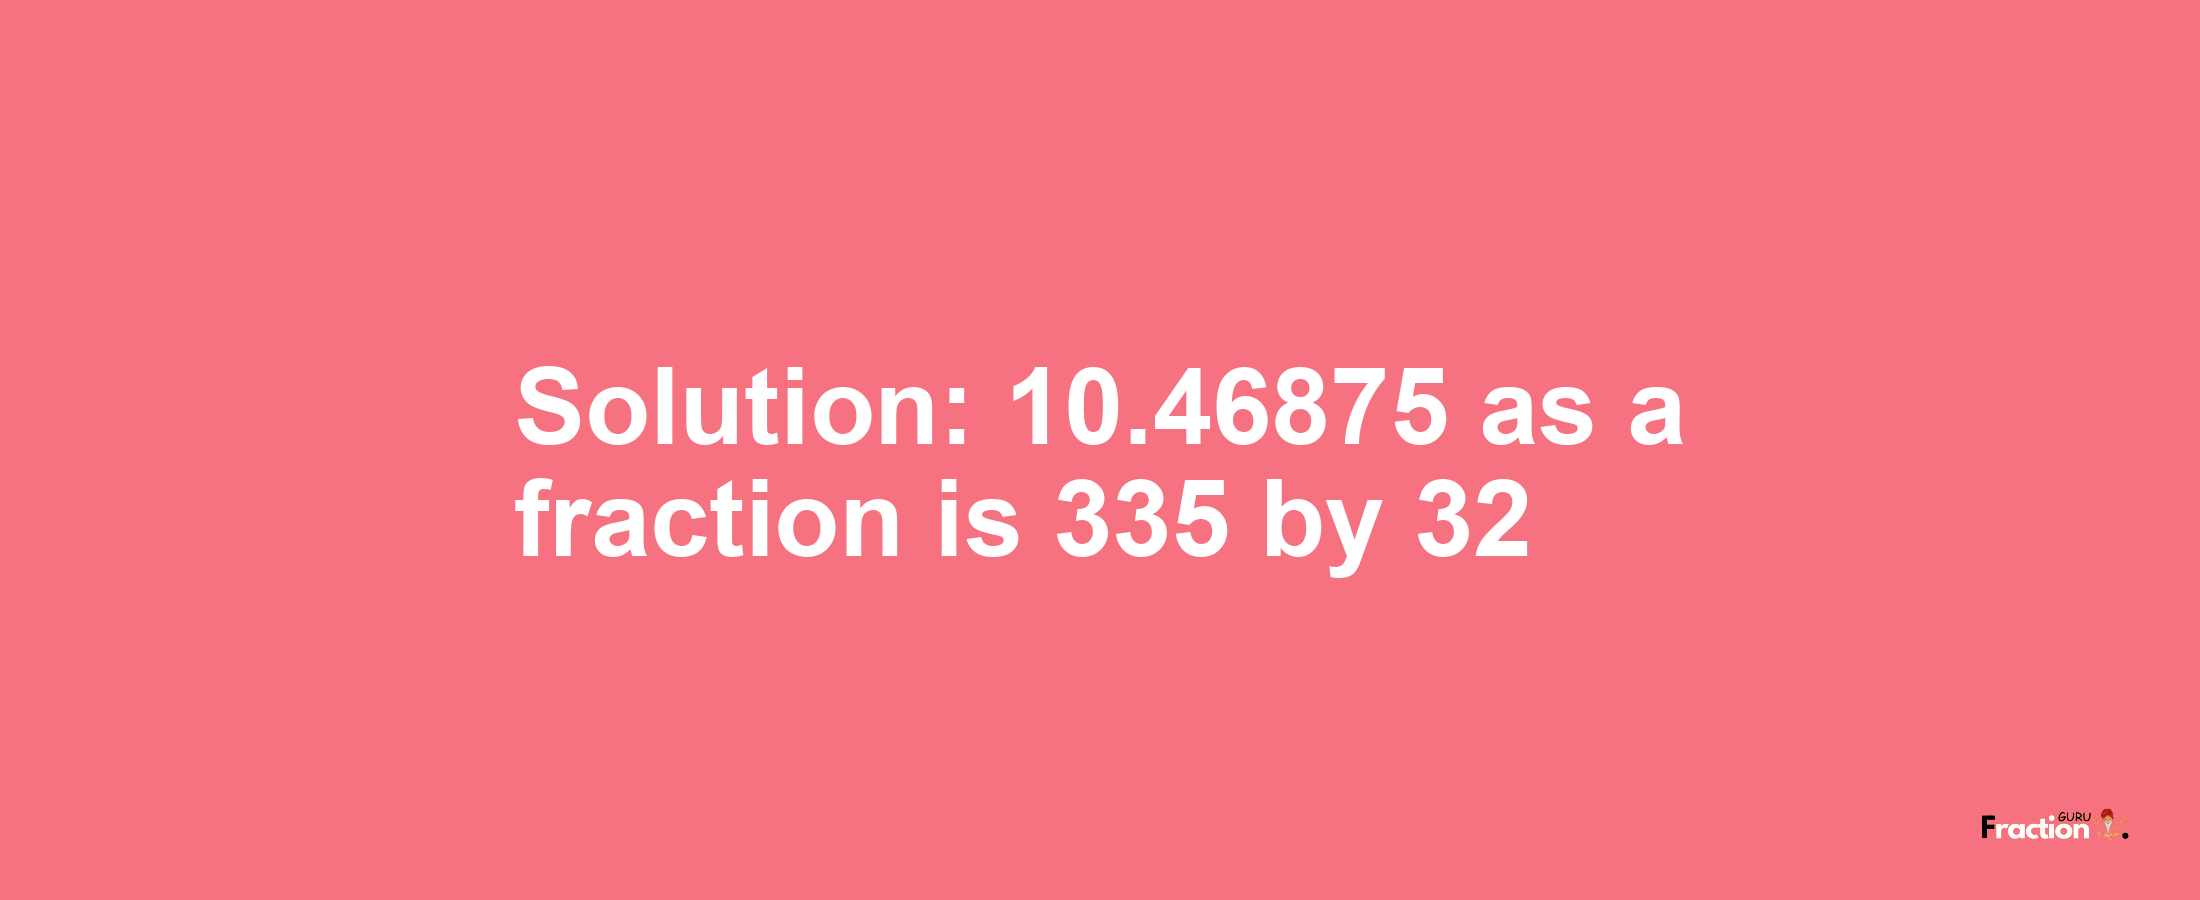 Solution:10.46875 as a fraction is 335/32